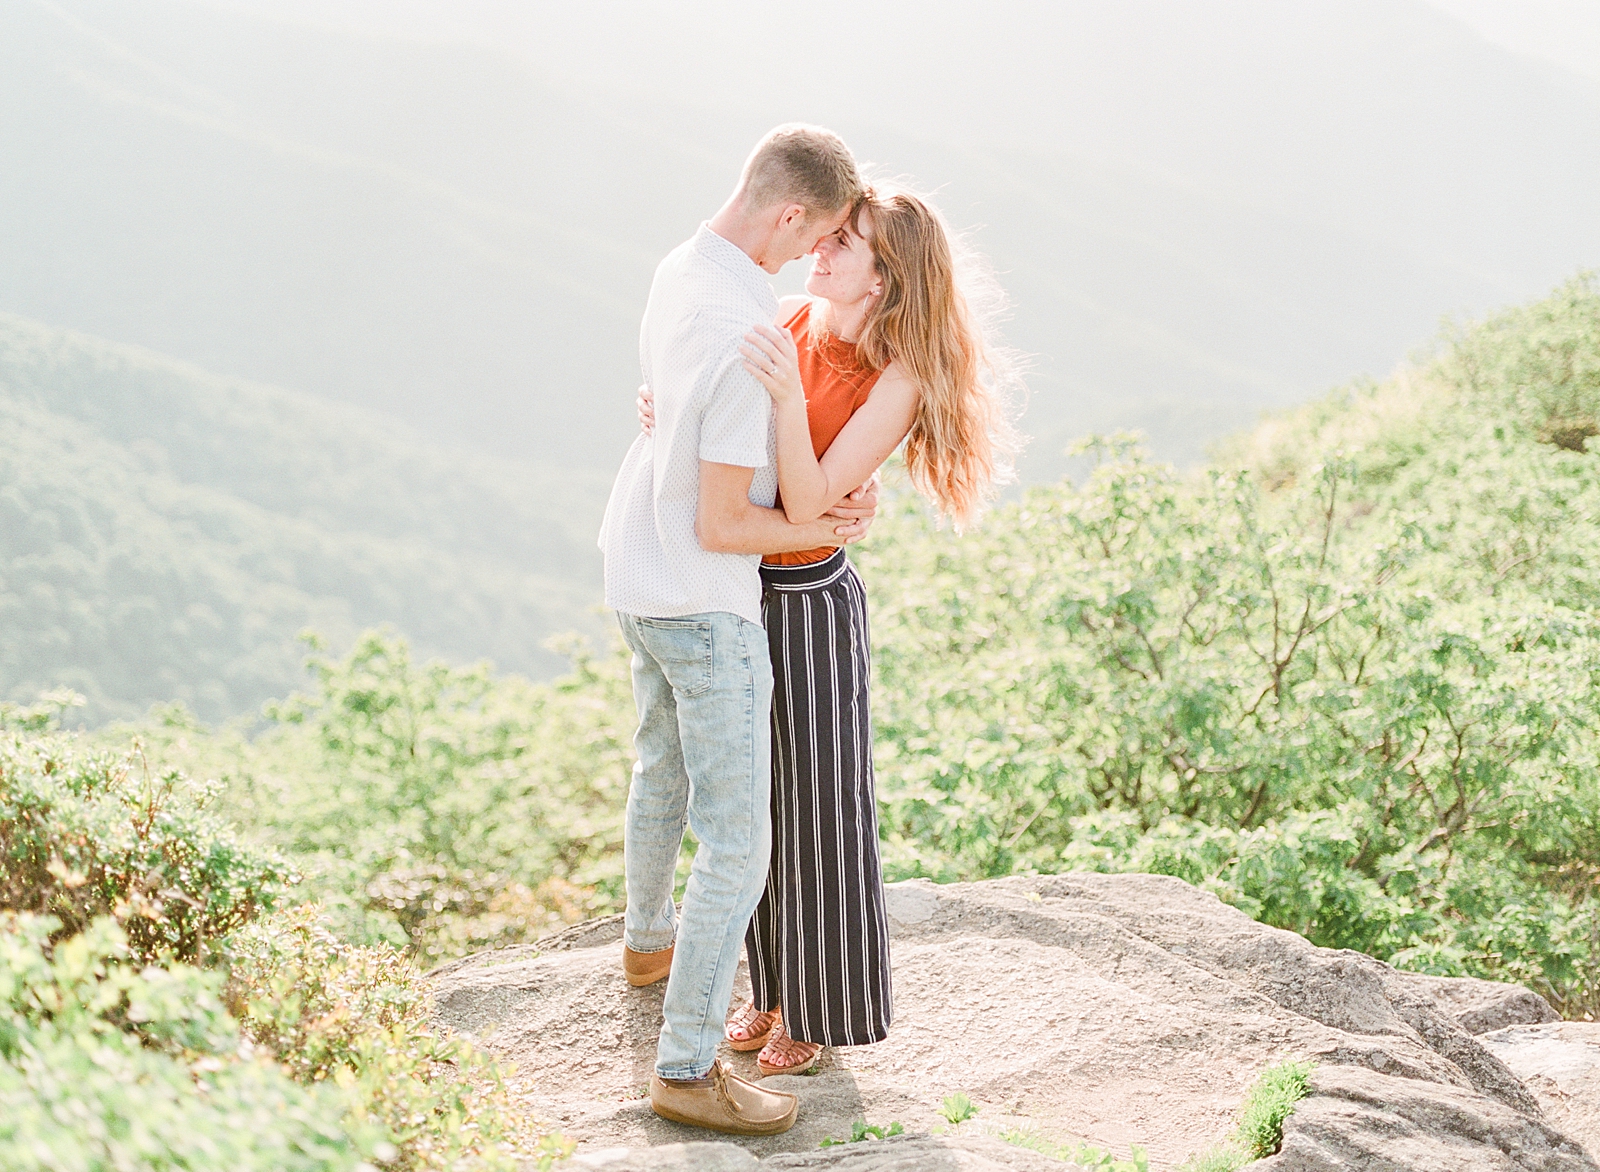 Craggy Gardens Engagement Film Photography of Couple Nose to Nose on Rock with Mountain Background Photo